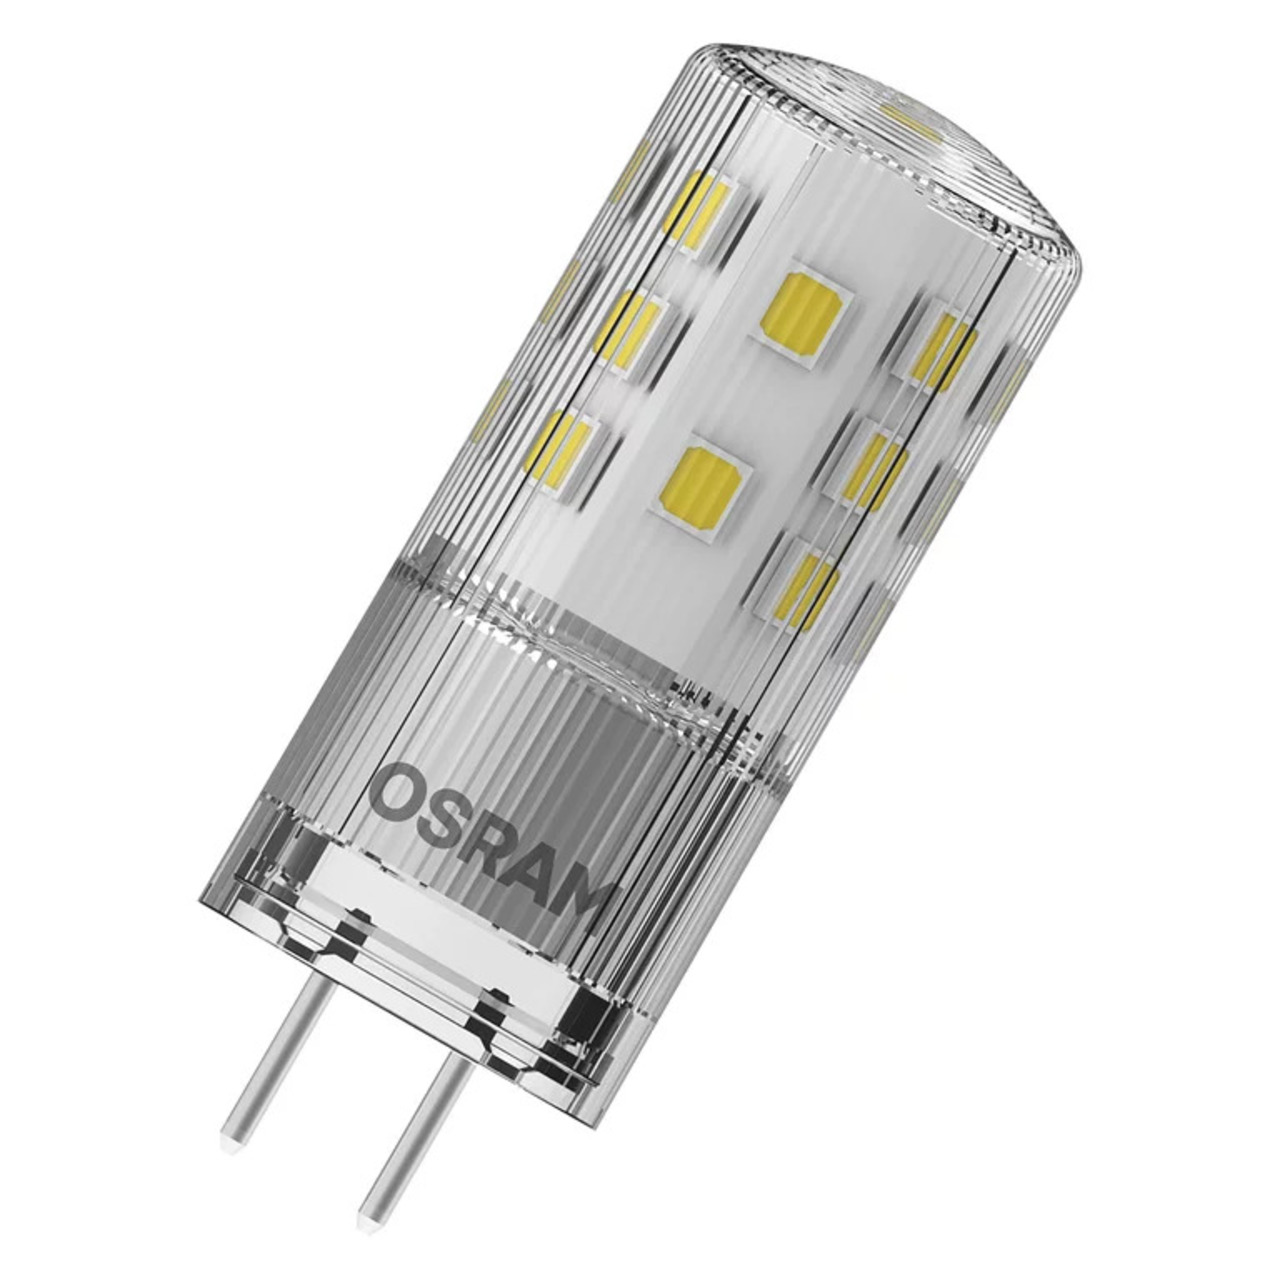 OSRAM 4-5-W-LED-Lampe T18- GY6-35- 470 lm- warmweiss- 320- 12V- dimmbar unter Beleuchtung